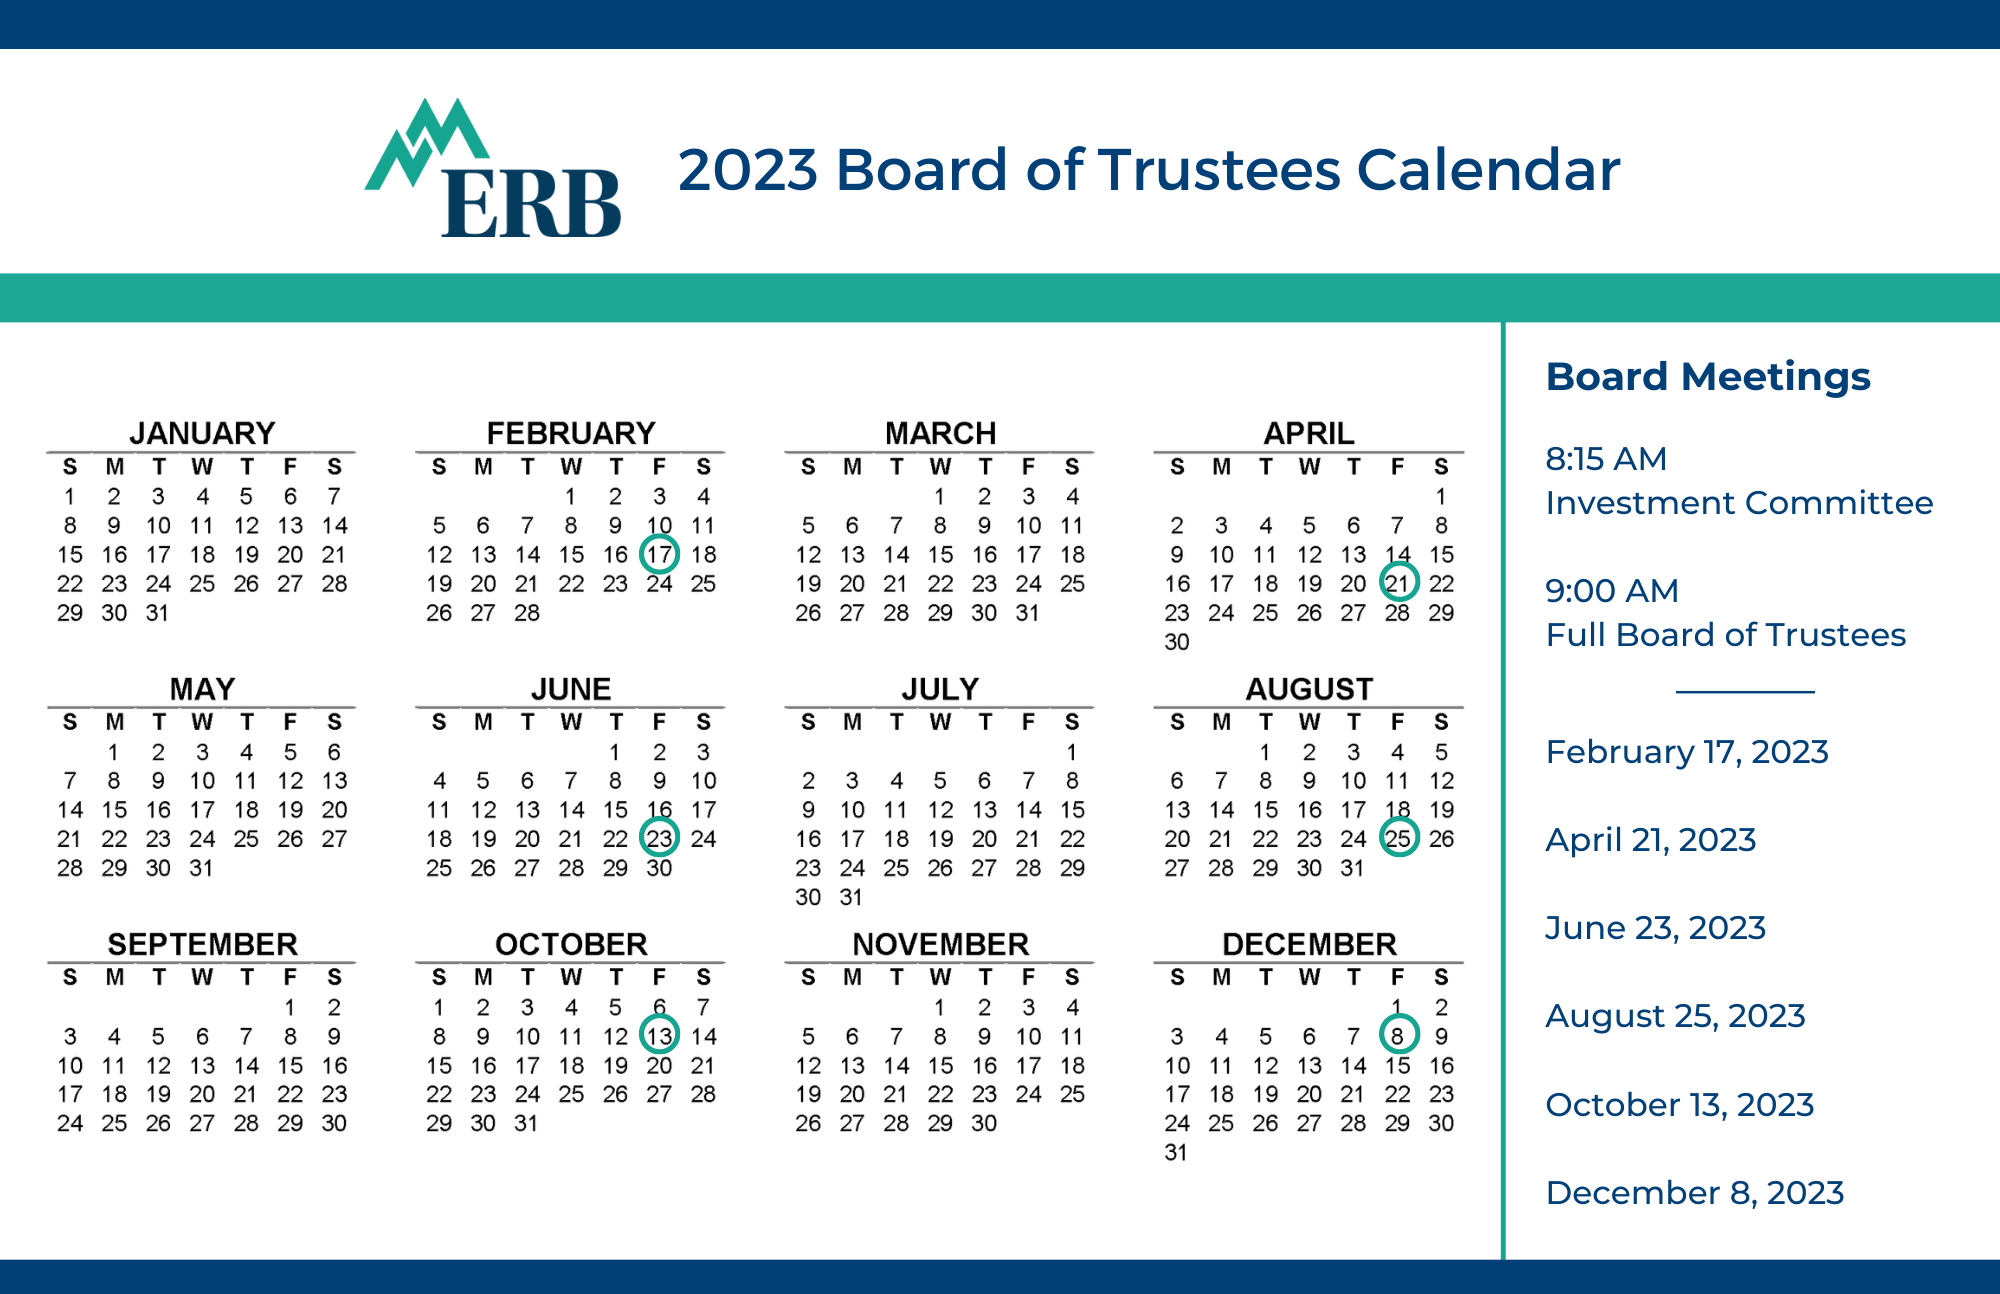 2023 Board of Trustee Meeting Calendar Dates: 2/17, 4/24, 6/23, 8/25, 10/13, and 12/8. Investment Committee meets same days only at 8:15am vs 9am.